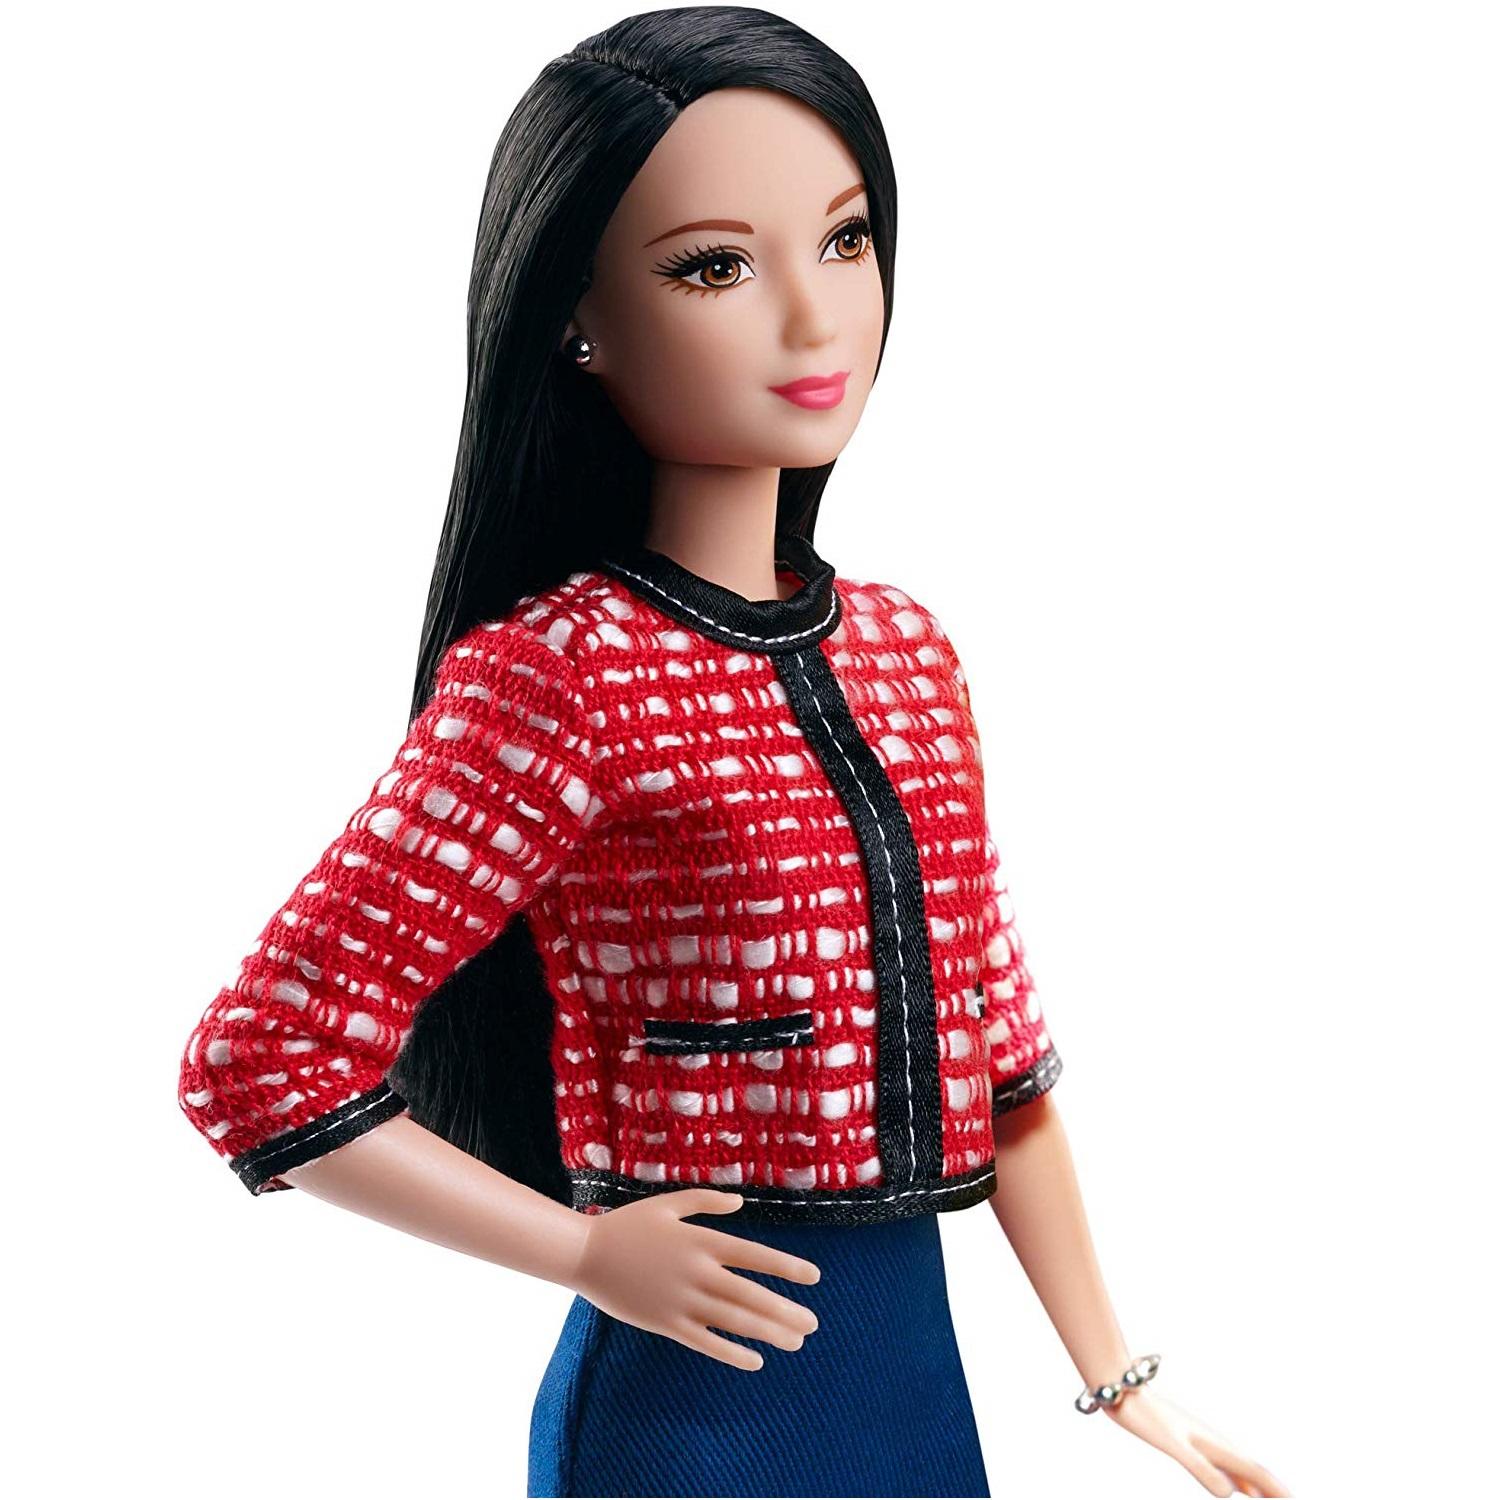 Barbie 60th Anniversary Political Candidate Doll3